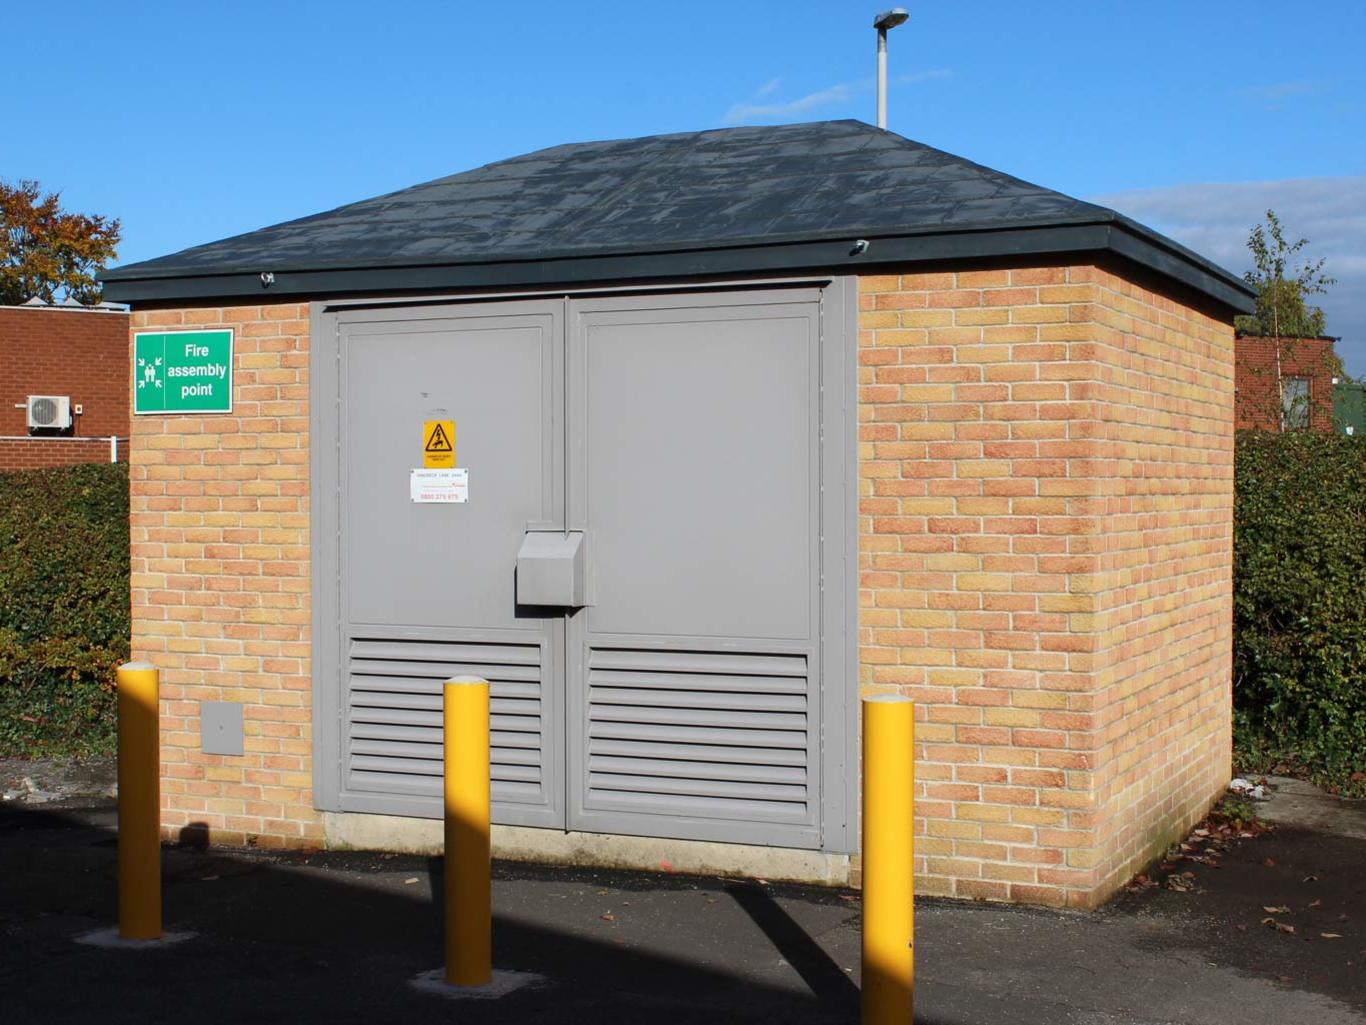 Electrical Substation, Wetherby - Completed